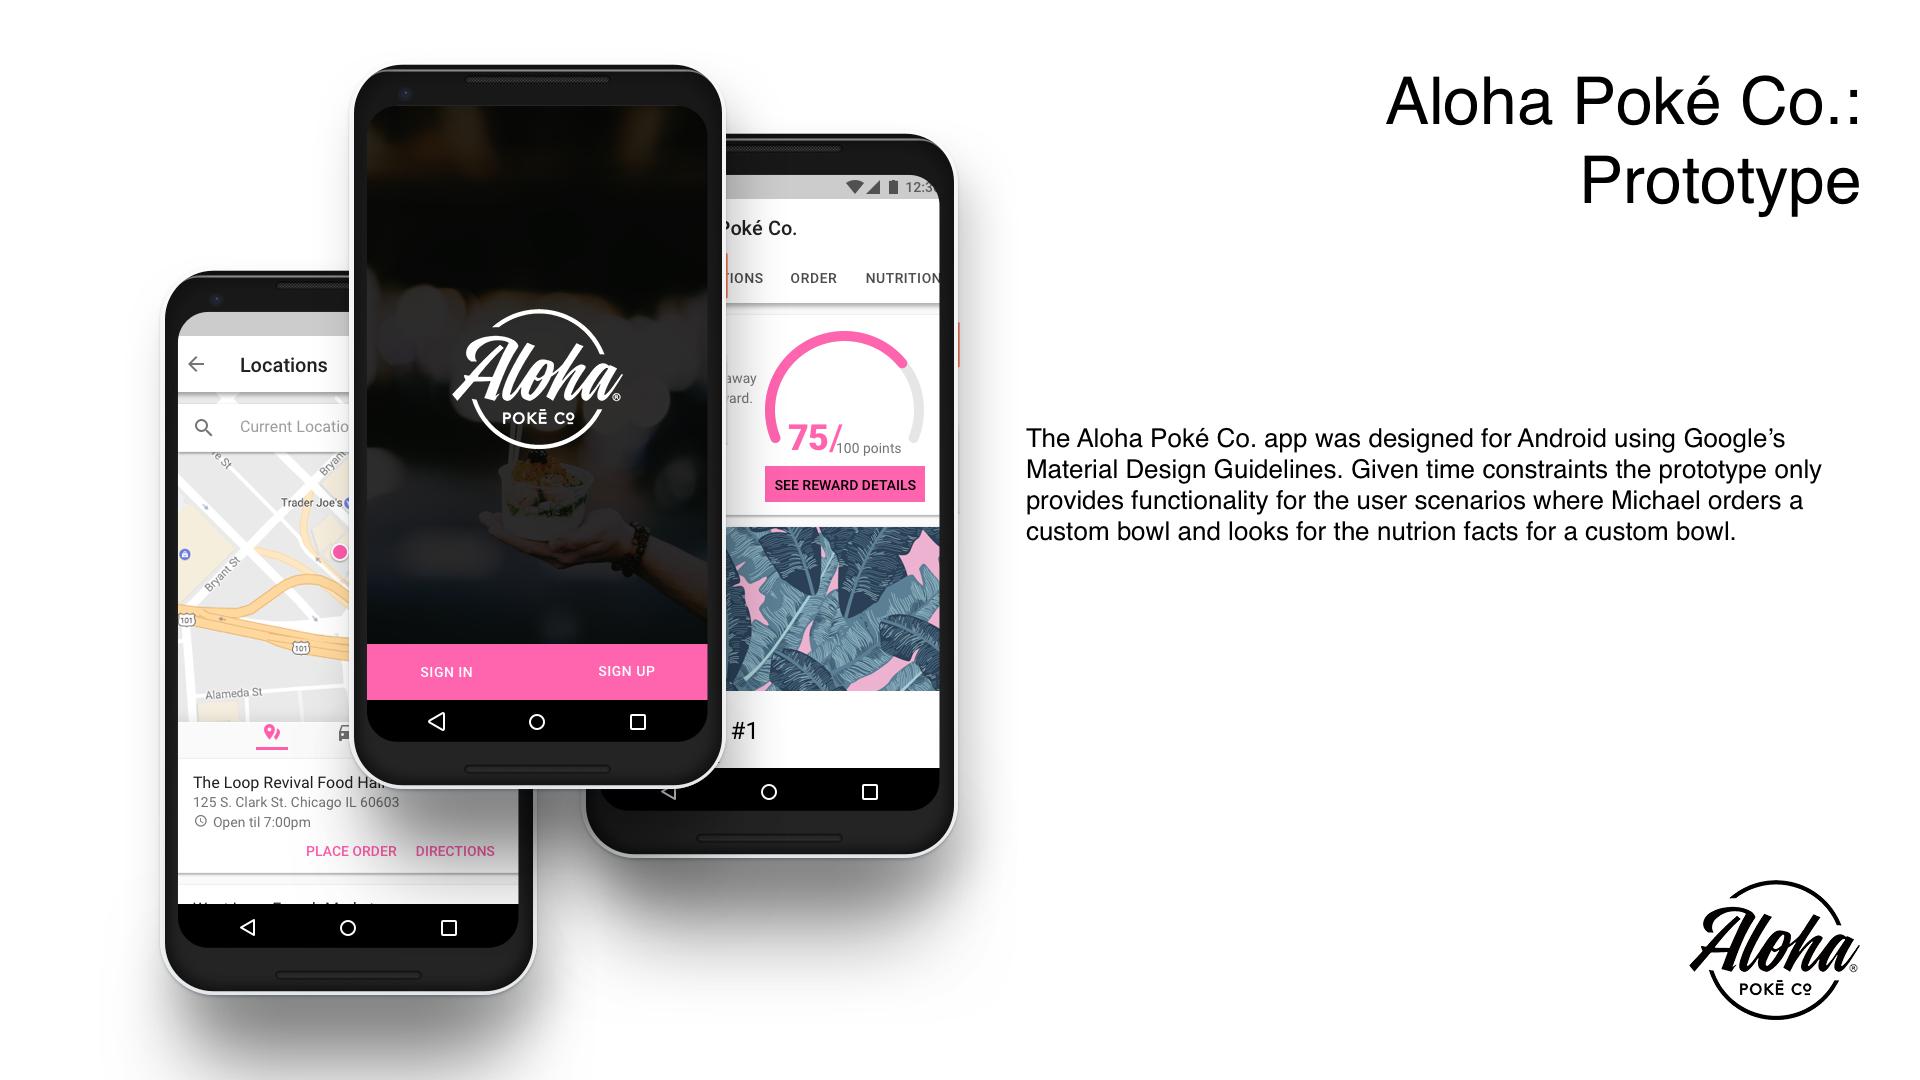 The Aloha Poké Co. app was designed for Android using Google’s Material Design Guidelines. Given time constraints the prototype only provides functionality for the user scenarios where Michael orders a custom bowl and looks for the nutrition facts for a custom bowl.